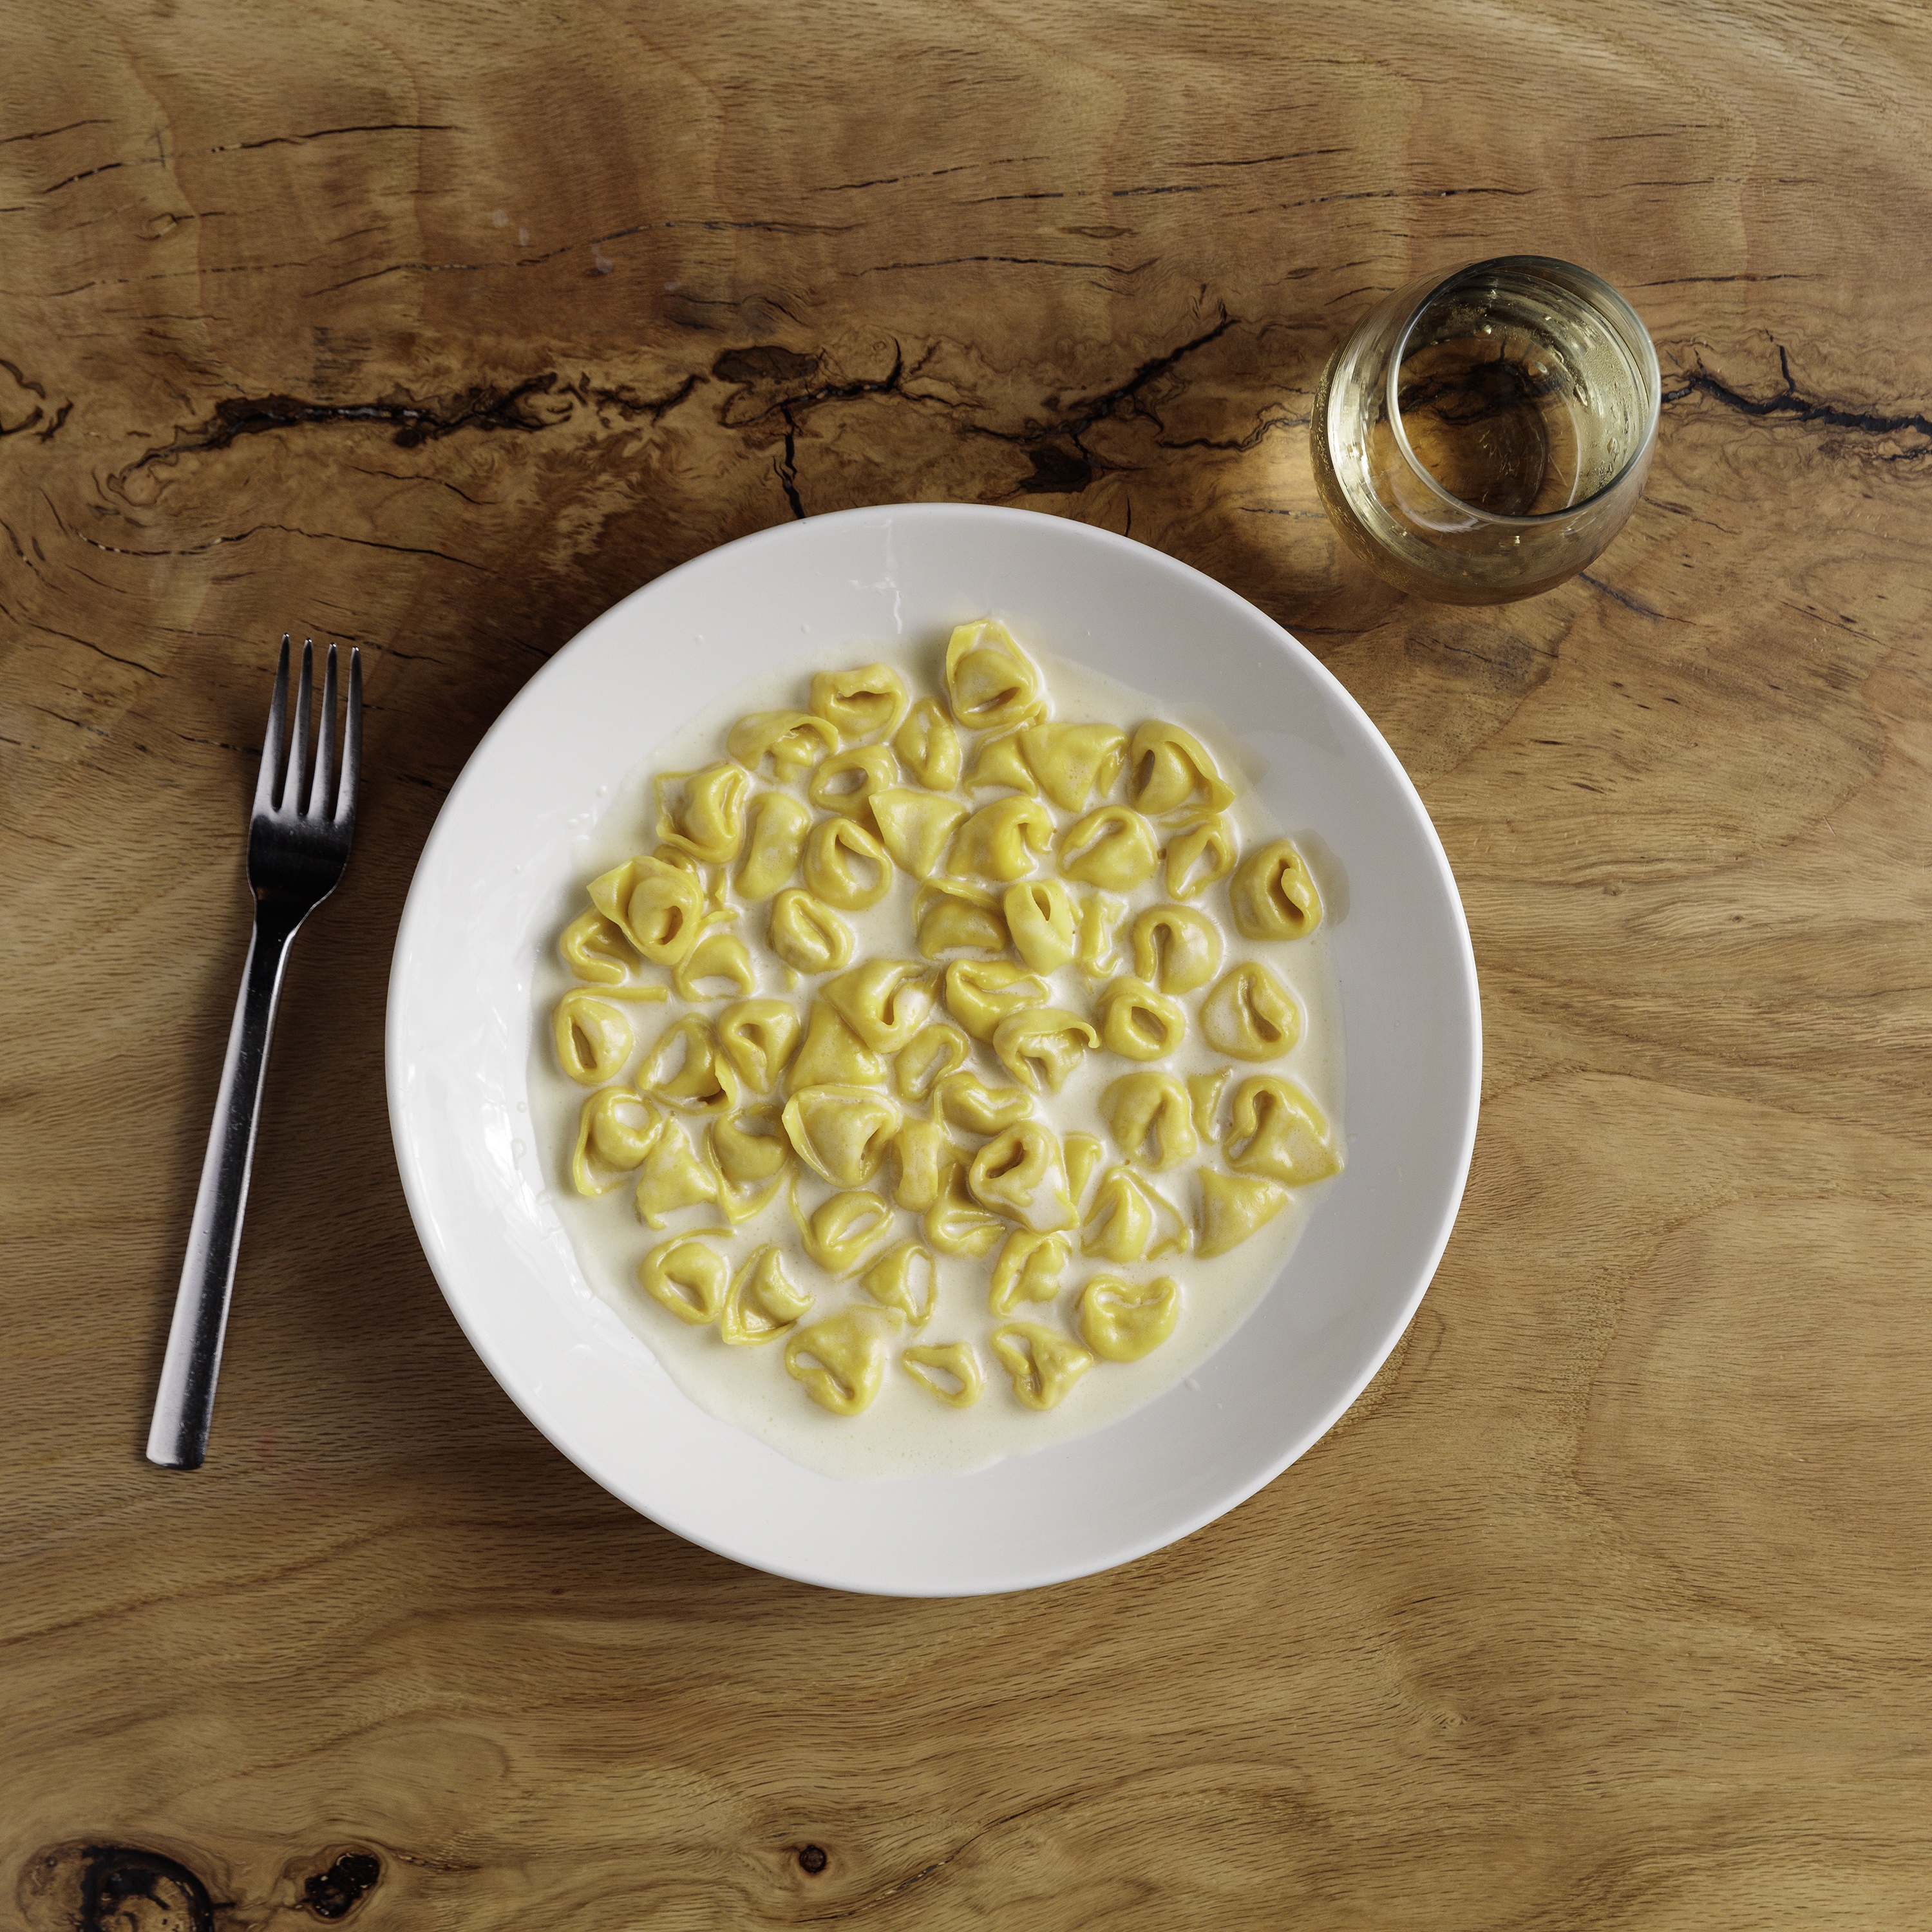 Bowl of tortellini in a white cream sauce on a wooden table.